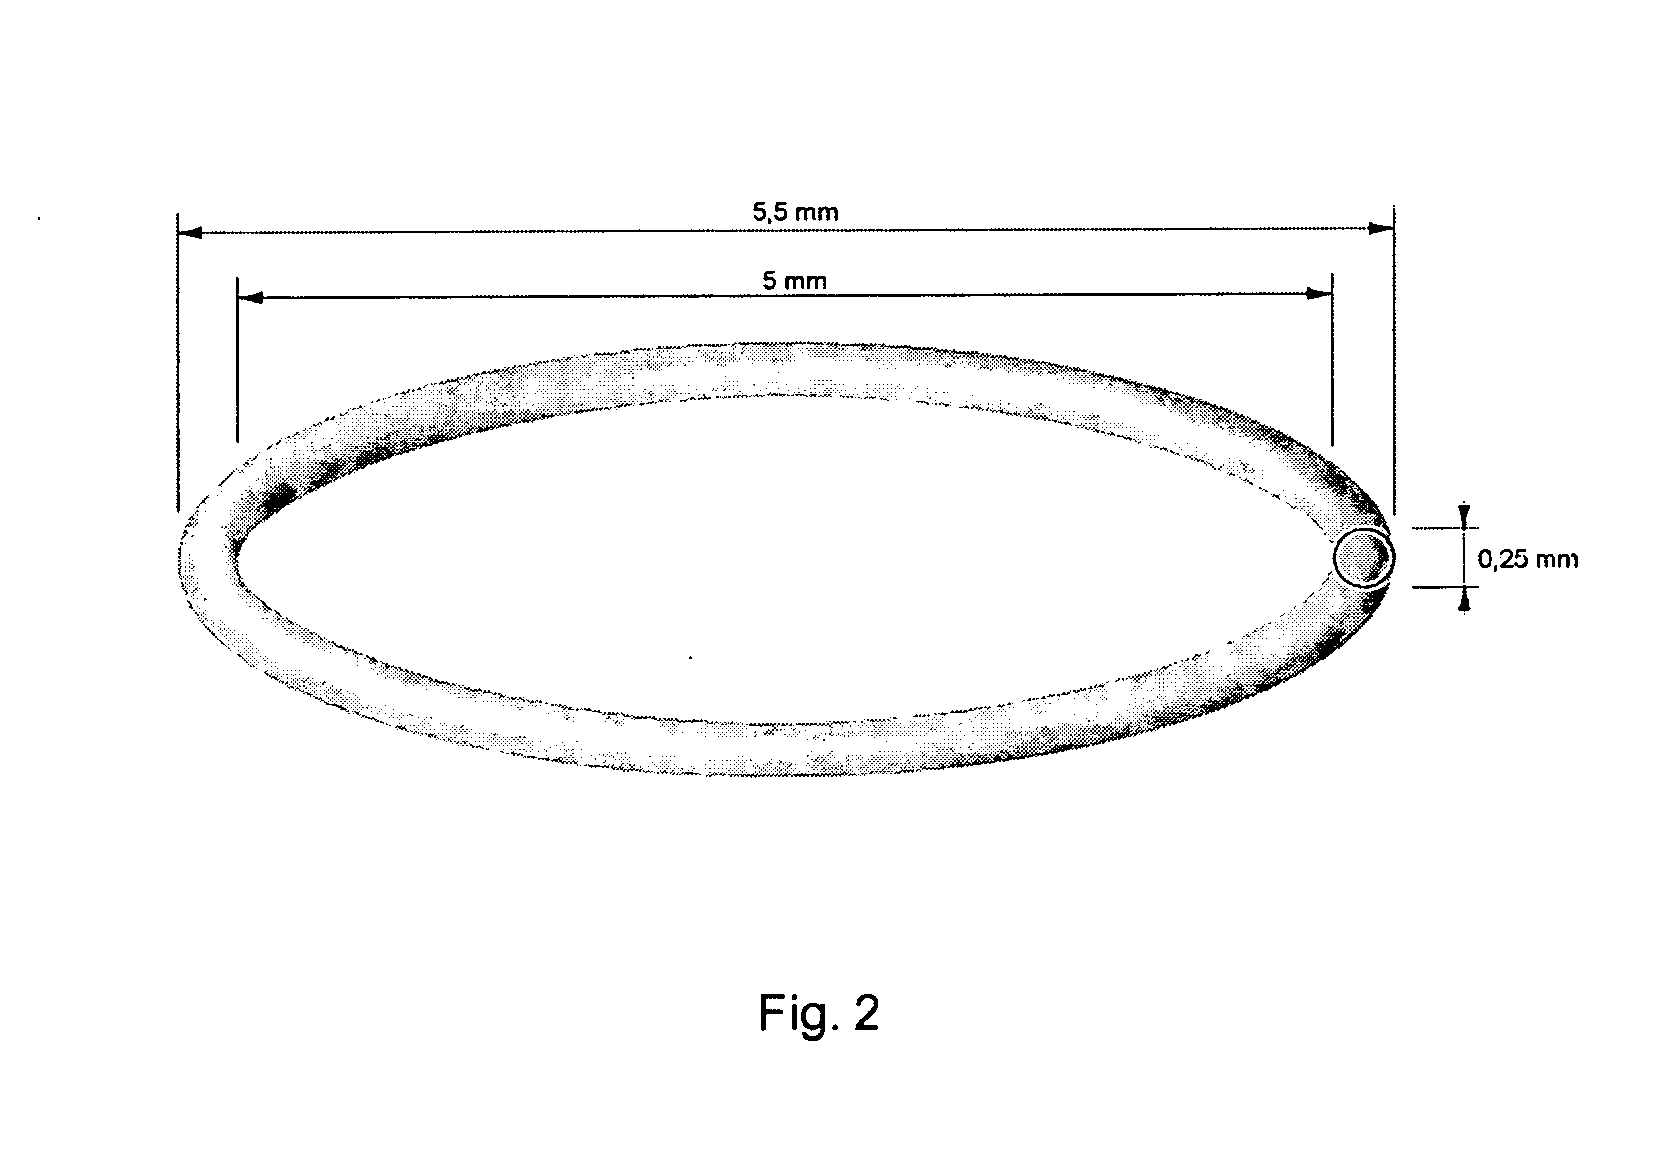 Bag-in-the-lens intraocular lens with removable optic and capsular accommodation ring